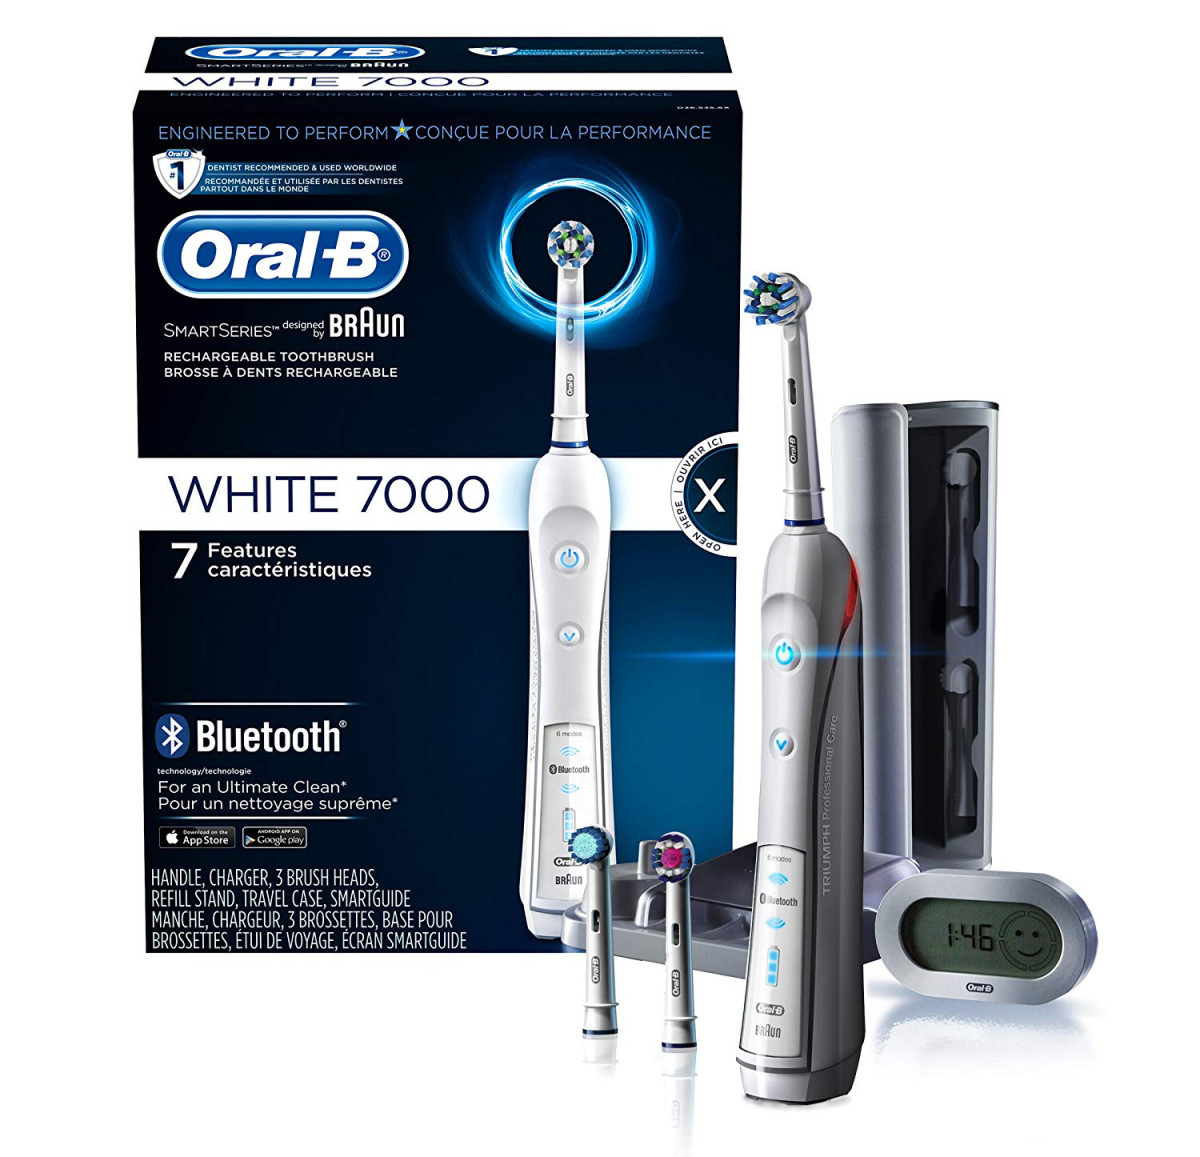 Save $63.25 on an Oral-B 7000 SmartSeries Rechargeable Electric Toothbrush